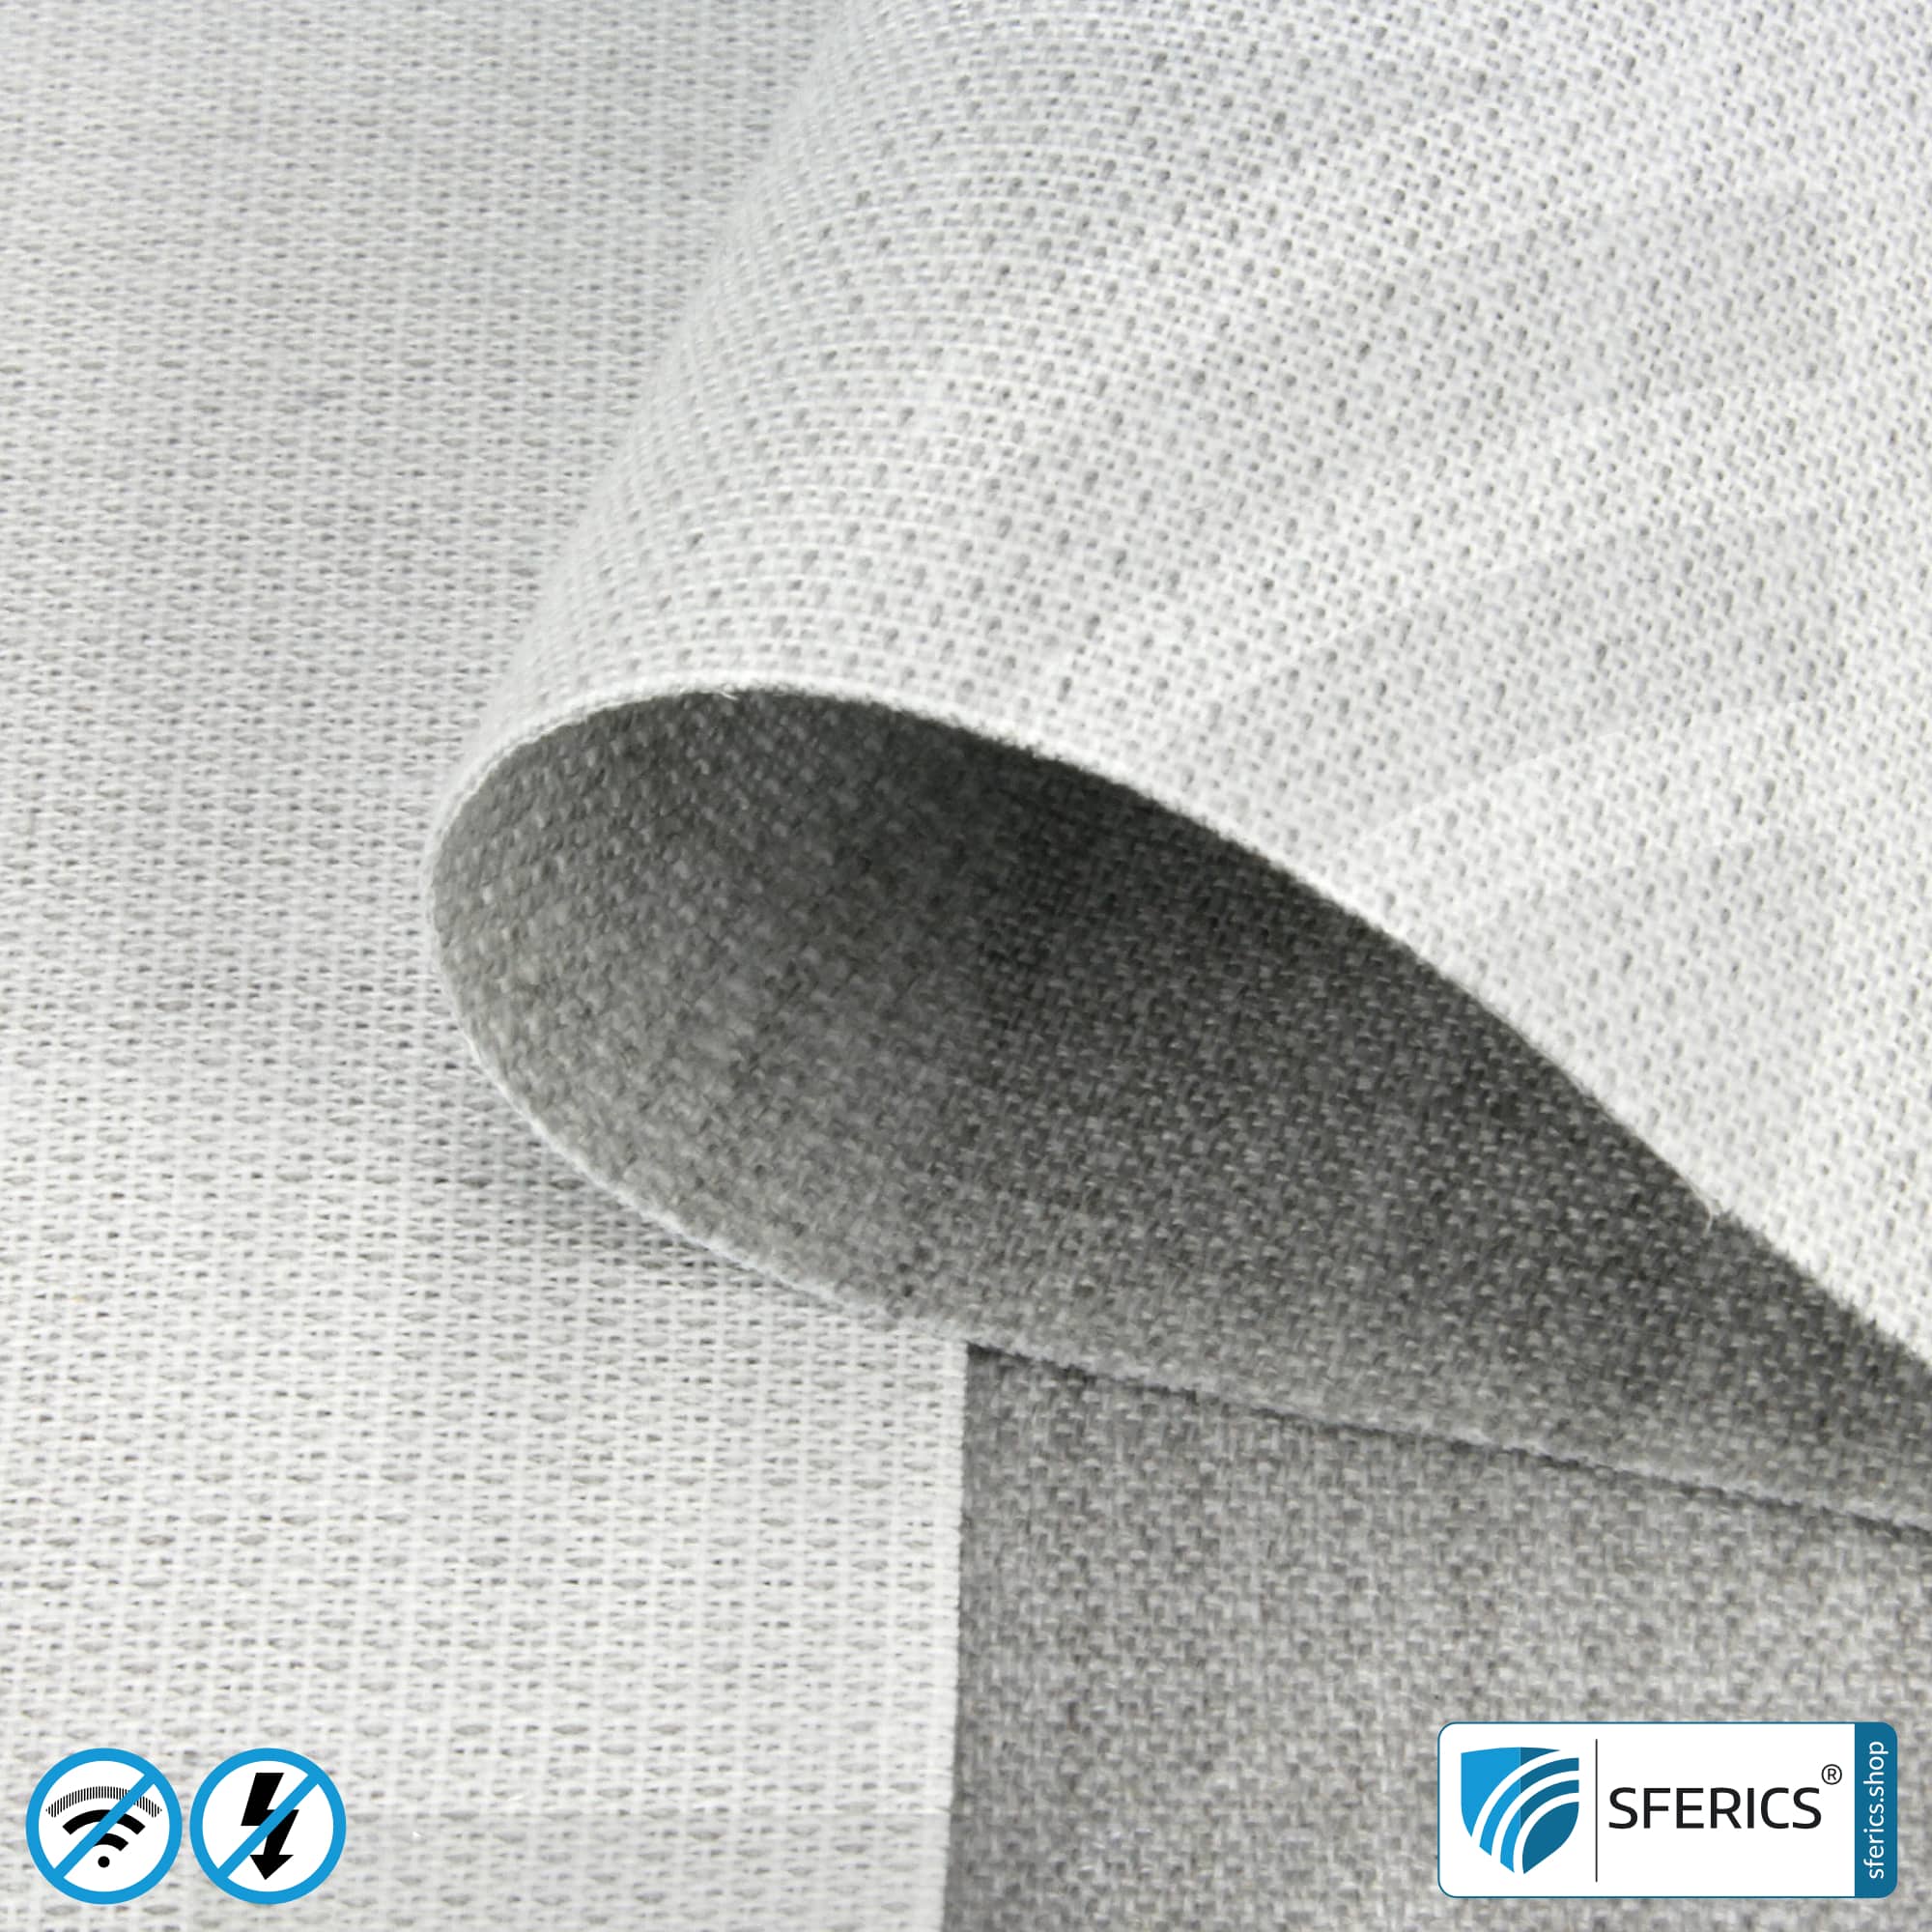 STEEL TWIN shielding fabric | ideal for production of floor mats, curtains, room dividers | opaque| RF screening attenuation against electrosmog up to 42 dB | TÜV-SÜD quality tested | Effective against 5G!